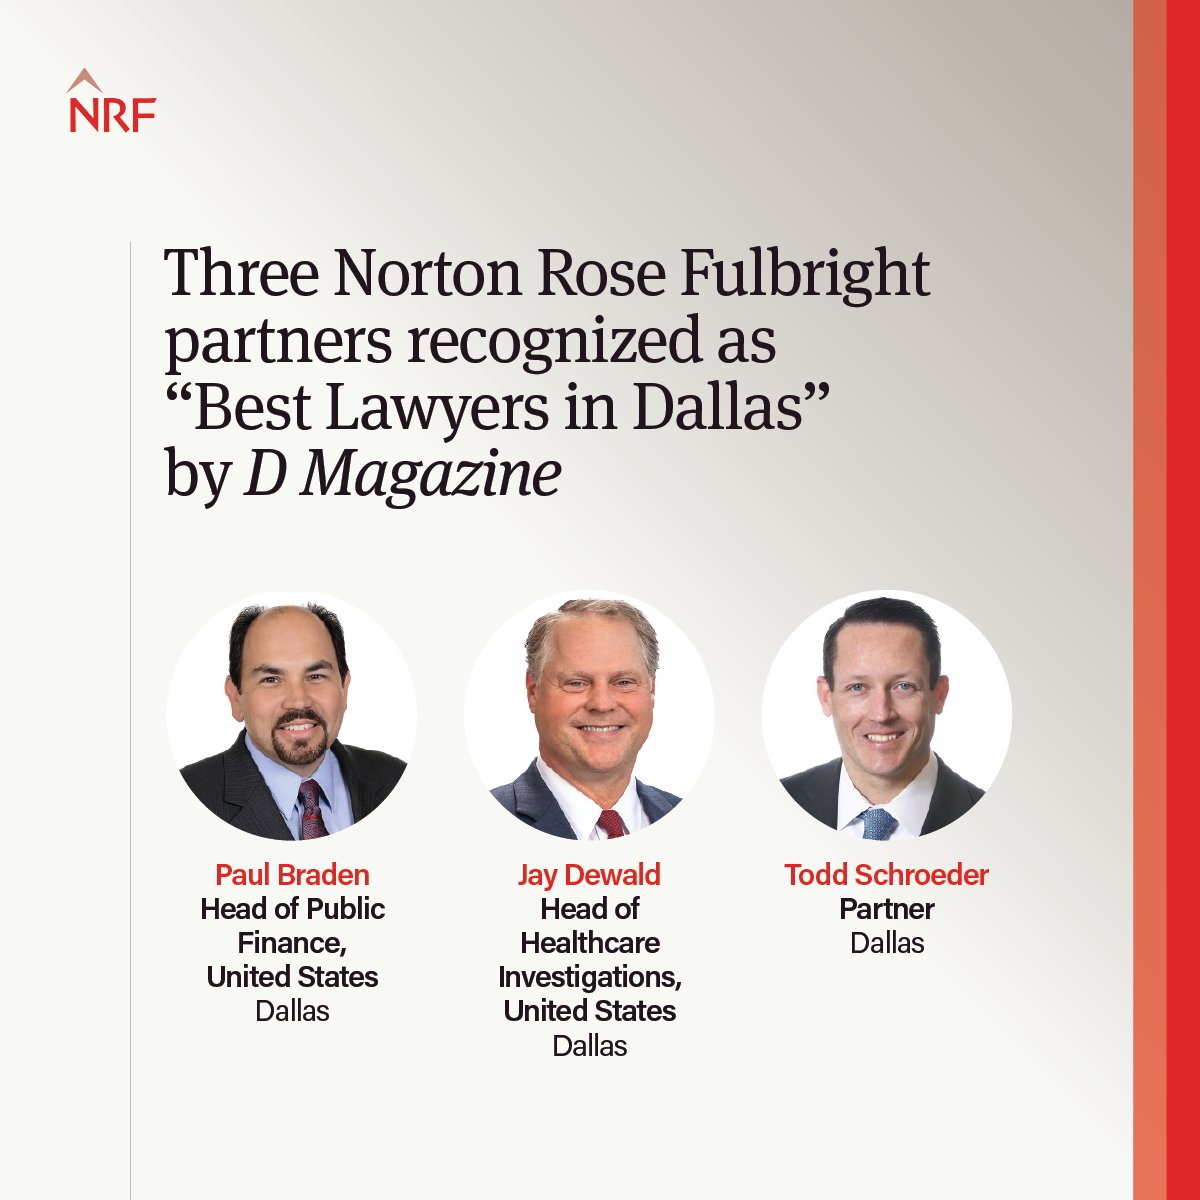 We are pleased to announce Paul Braden, Jay Dewald and Todd Schroeder have been named 'Best Lawyers in Dallas' by D Magazine. ow.ly/2SIE50Ry0jk